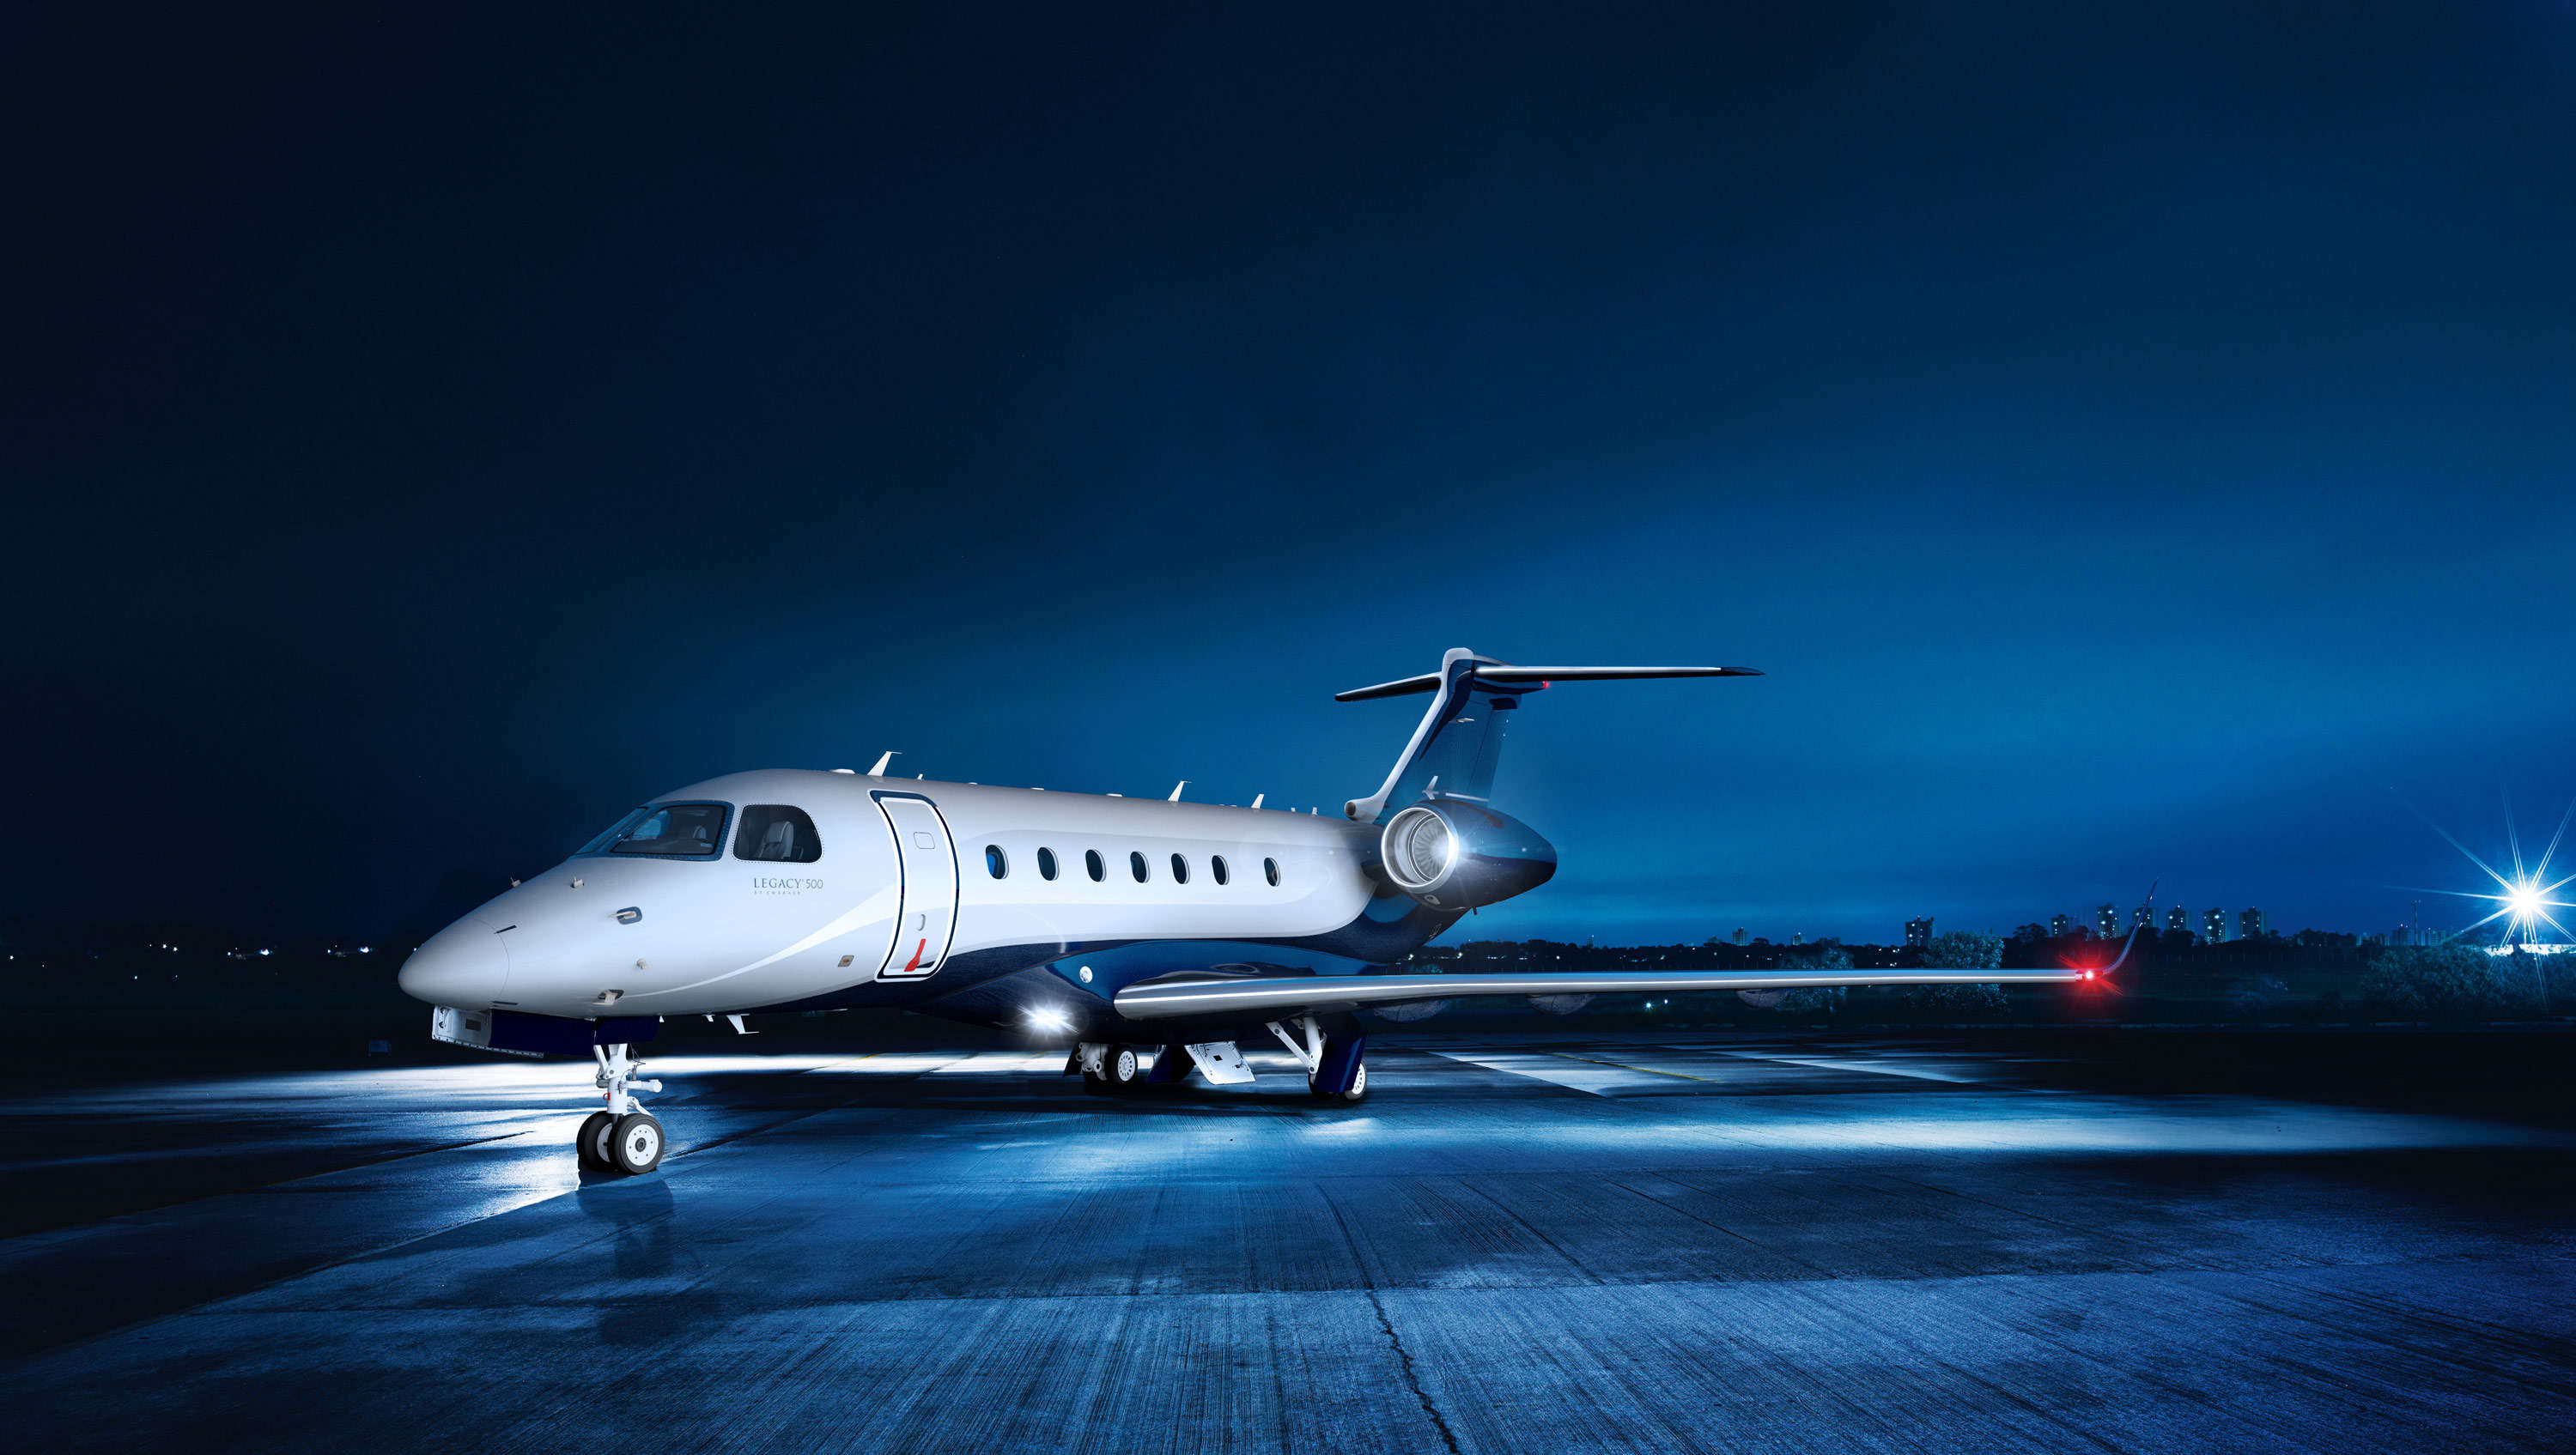 Embraer Legacy, Jackie Chan's private jet, Business Insider feature, Celebrity aviation luxury, 3000x1700 HD Desktop